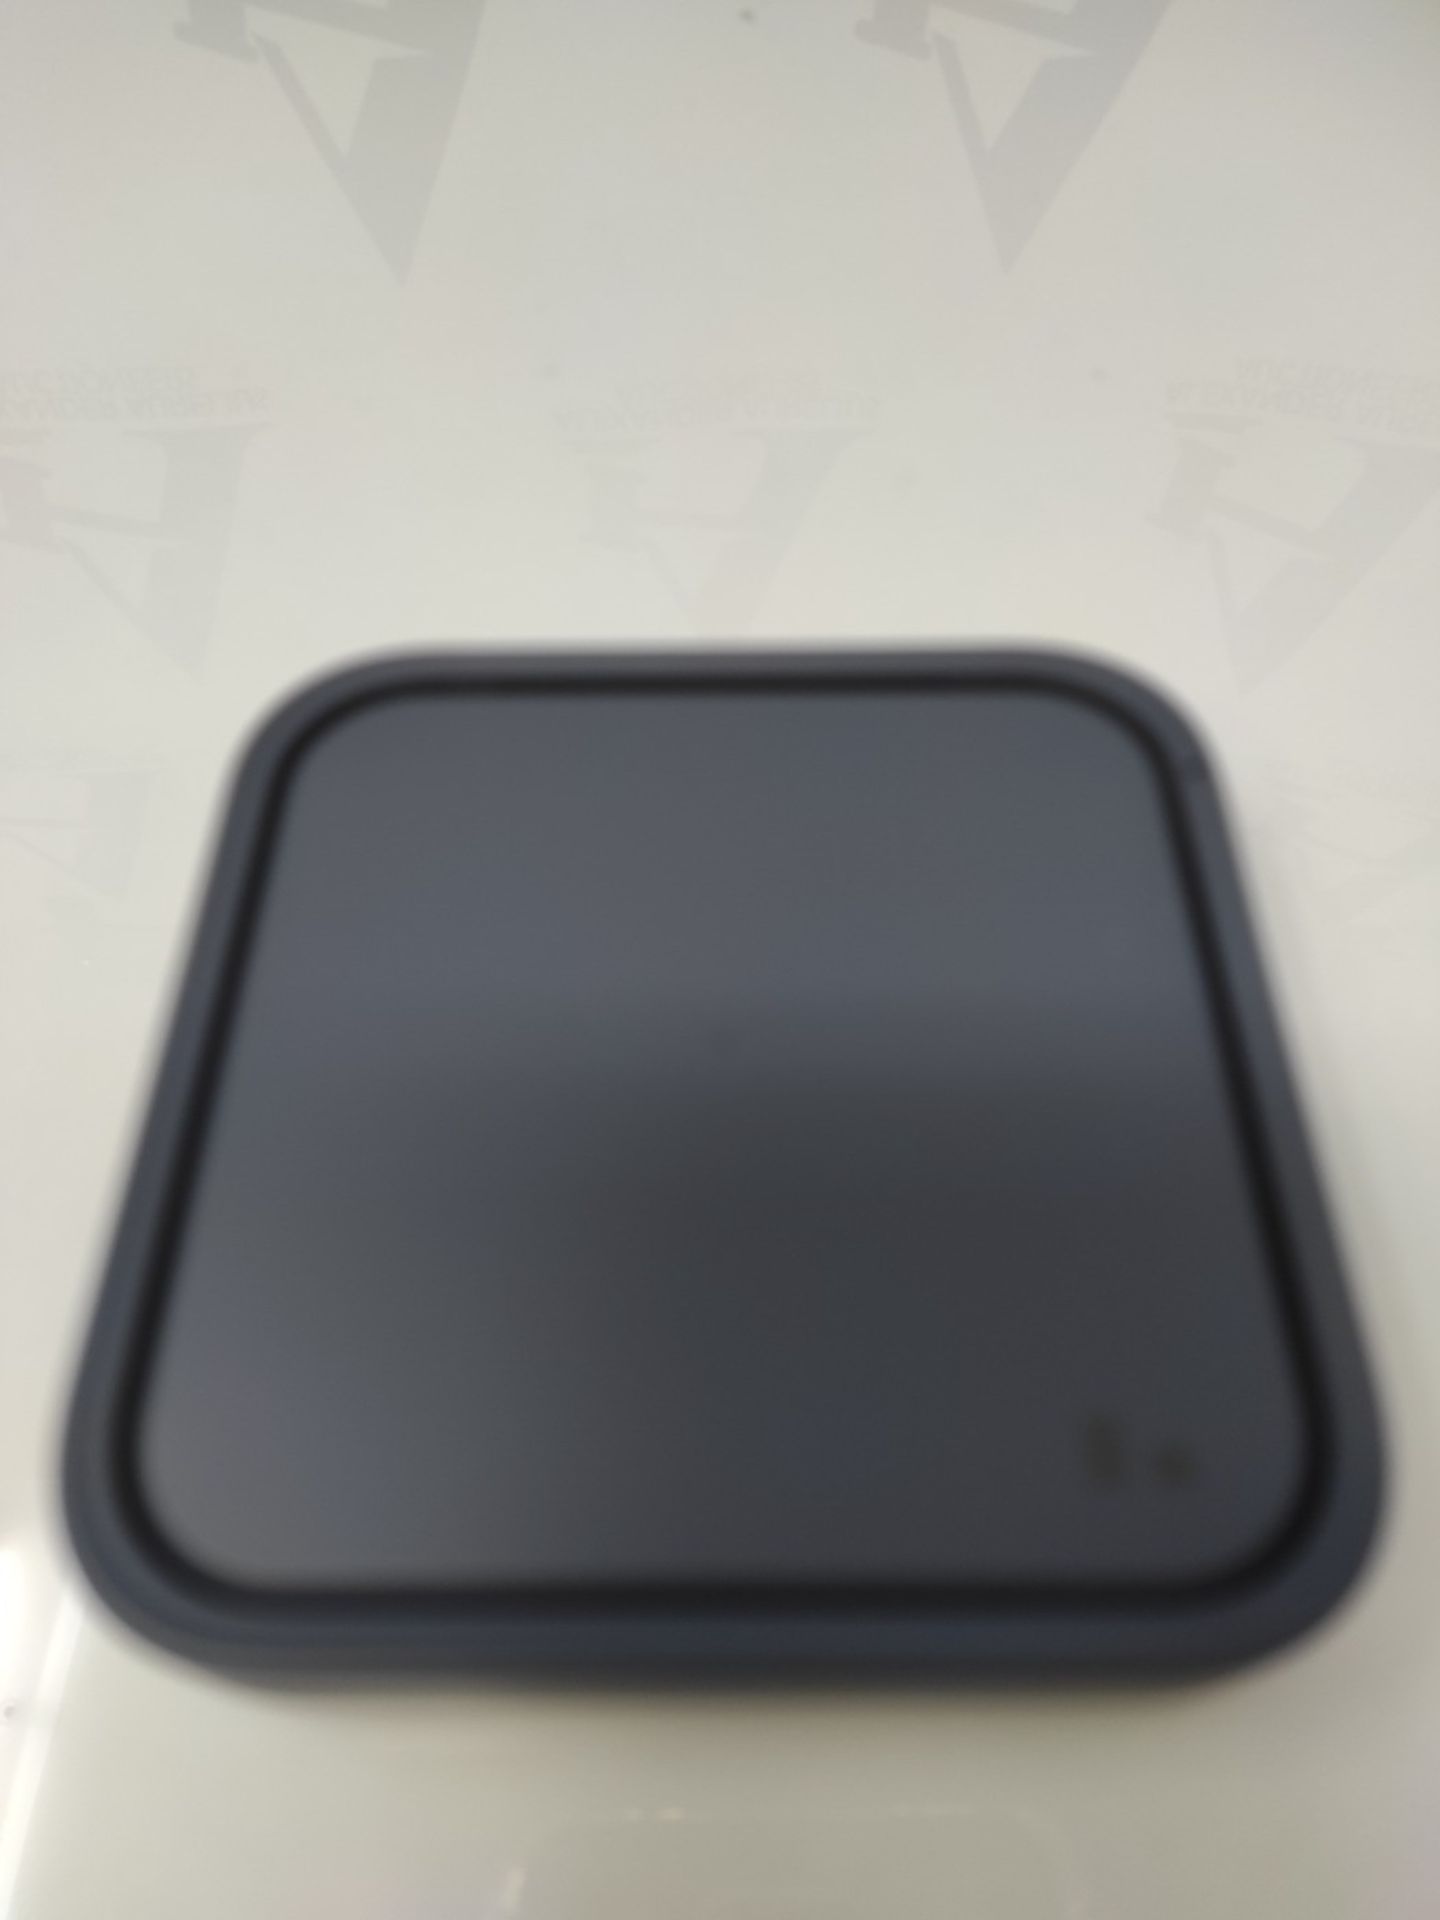 Samsung Galaxy Official Wireless Charging Pad, Black - Image 2 of 3